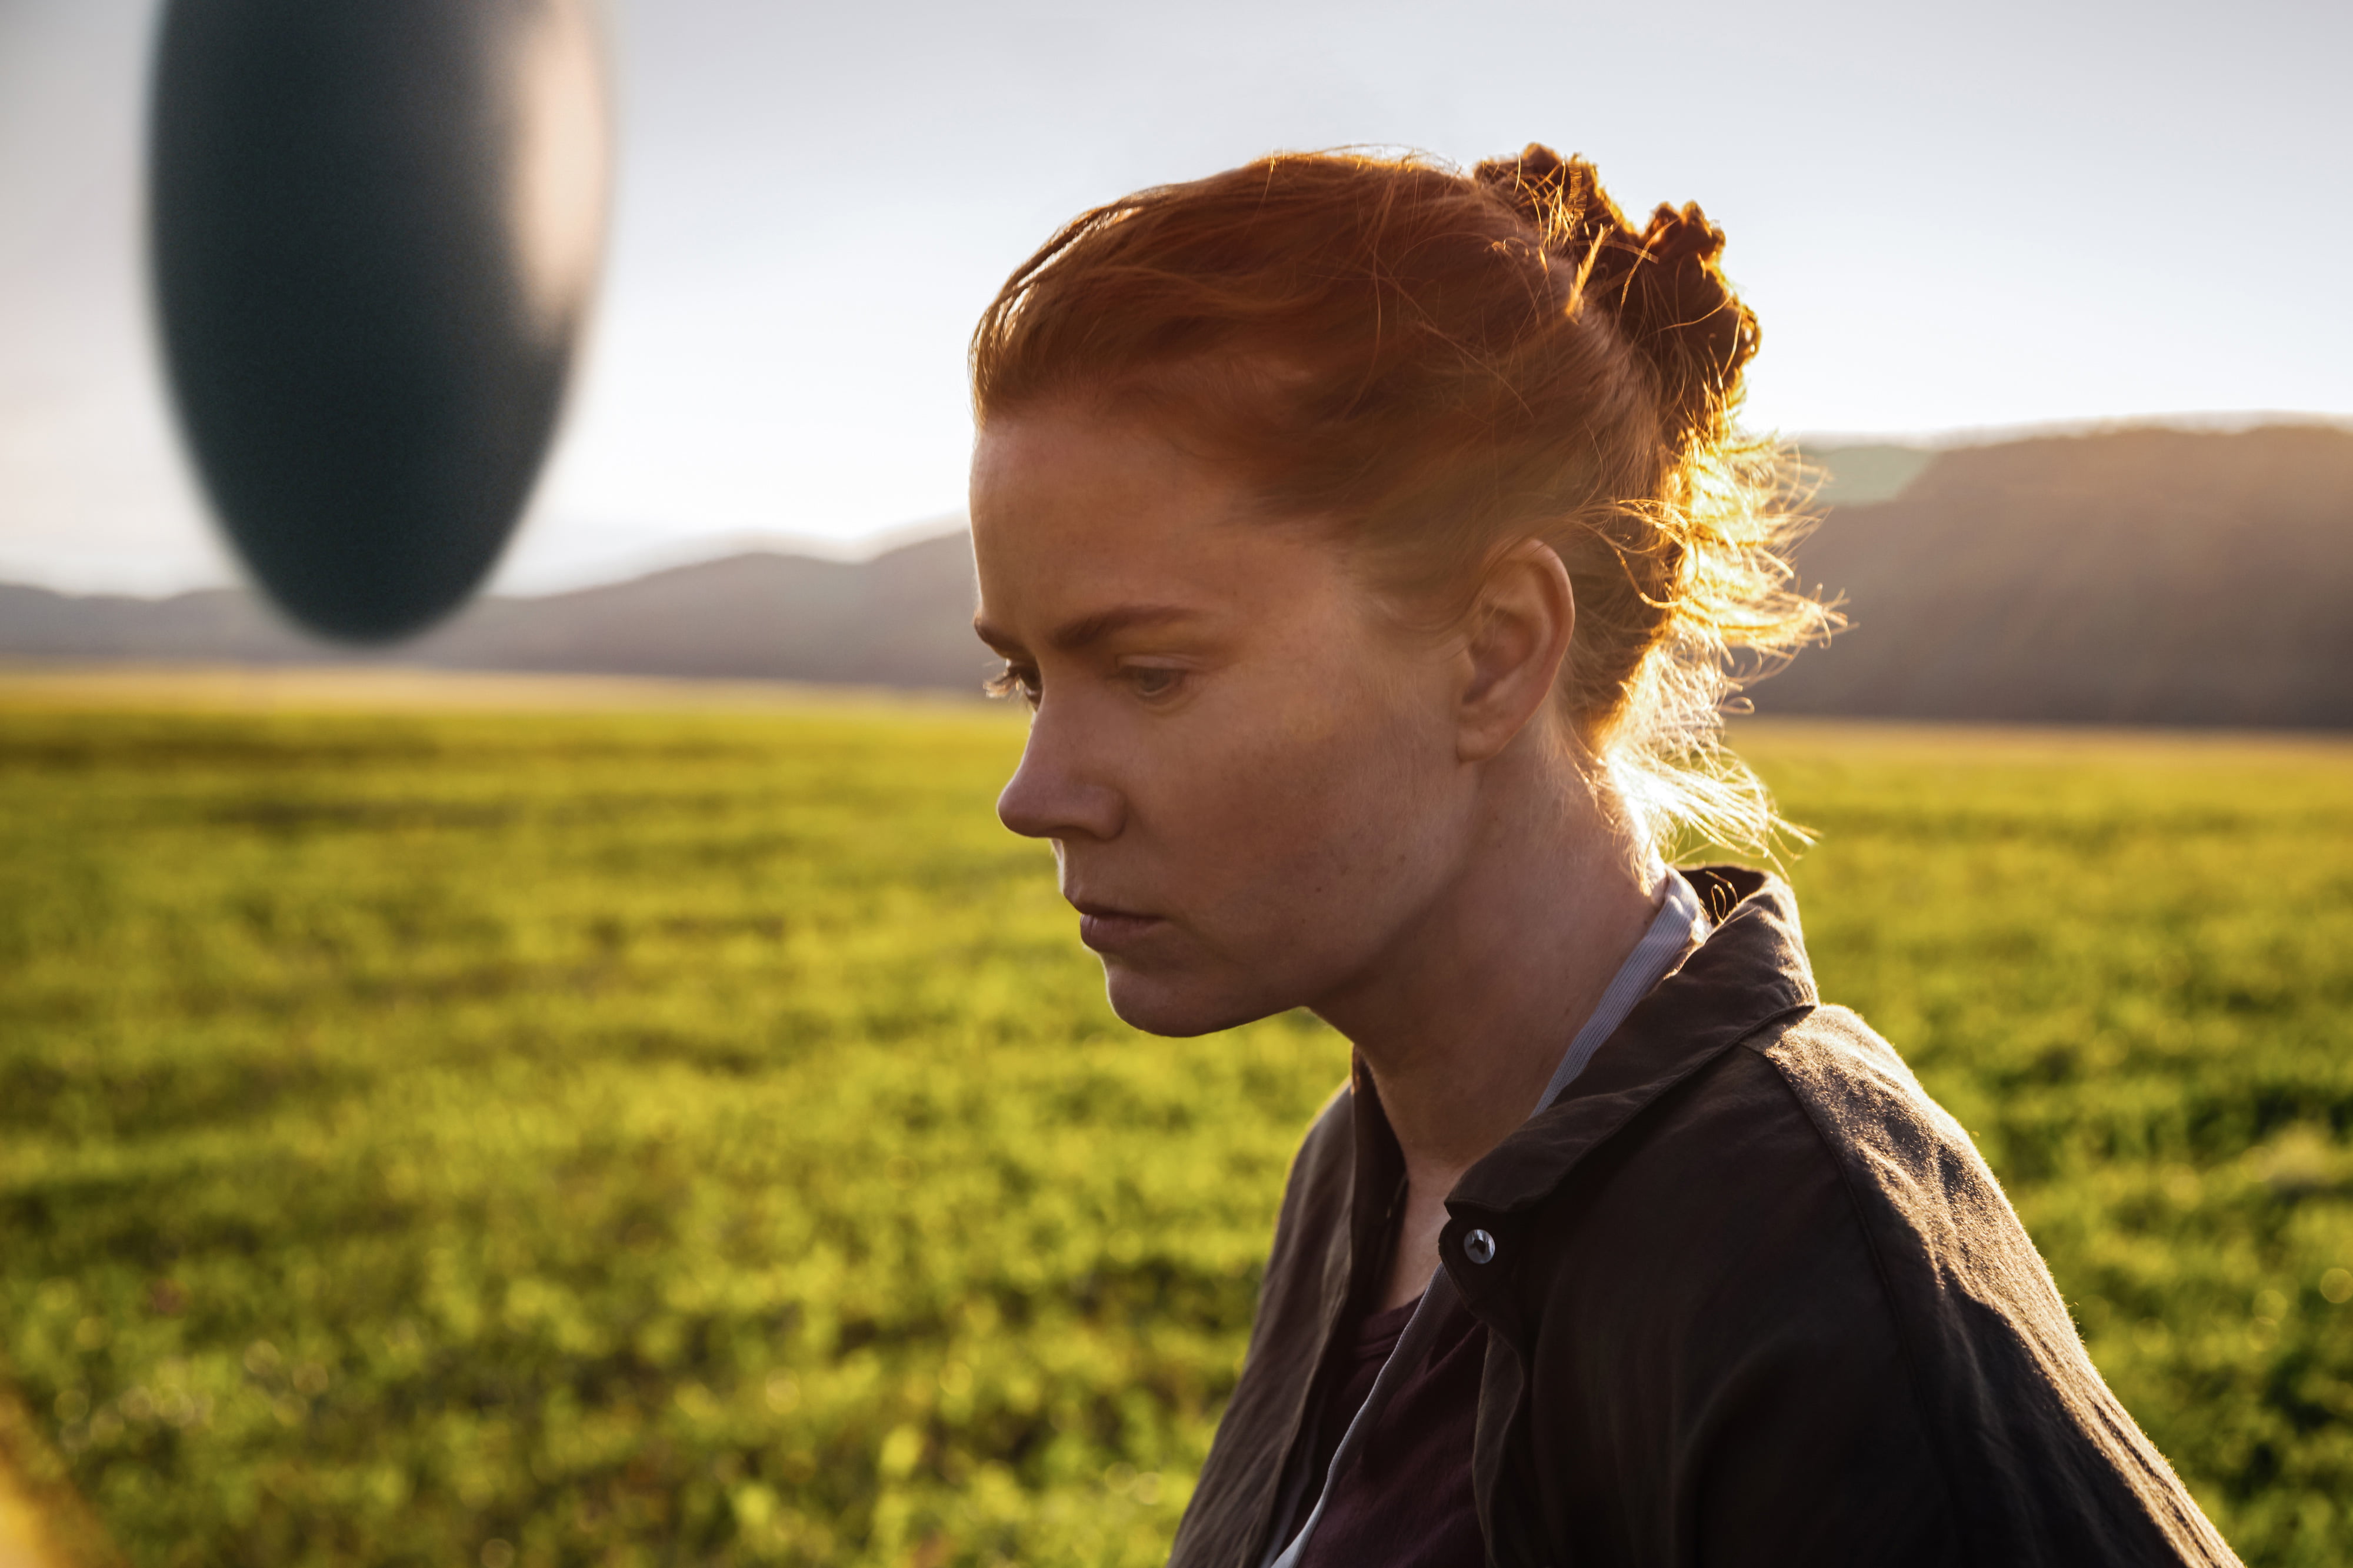 arrival, 2016 movies, amy adams, one person, headshot, portrait